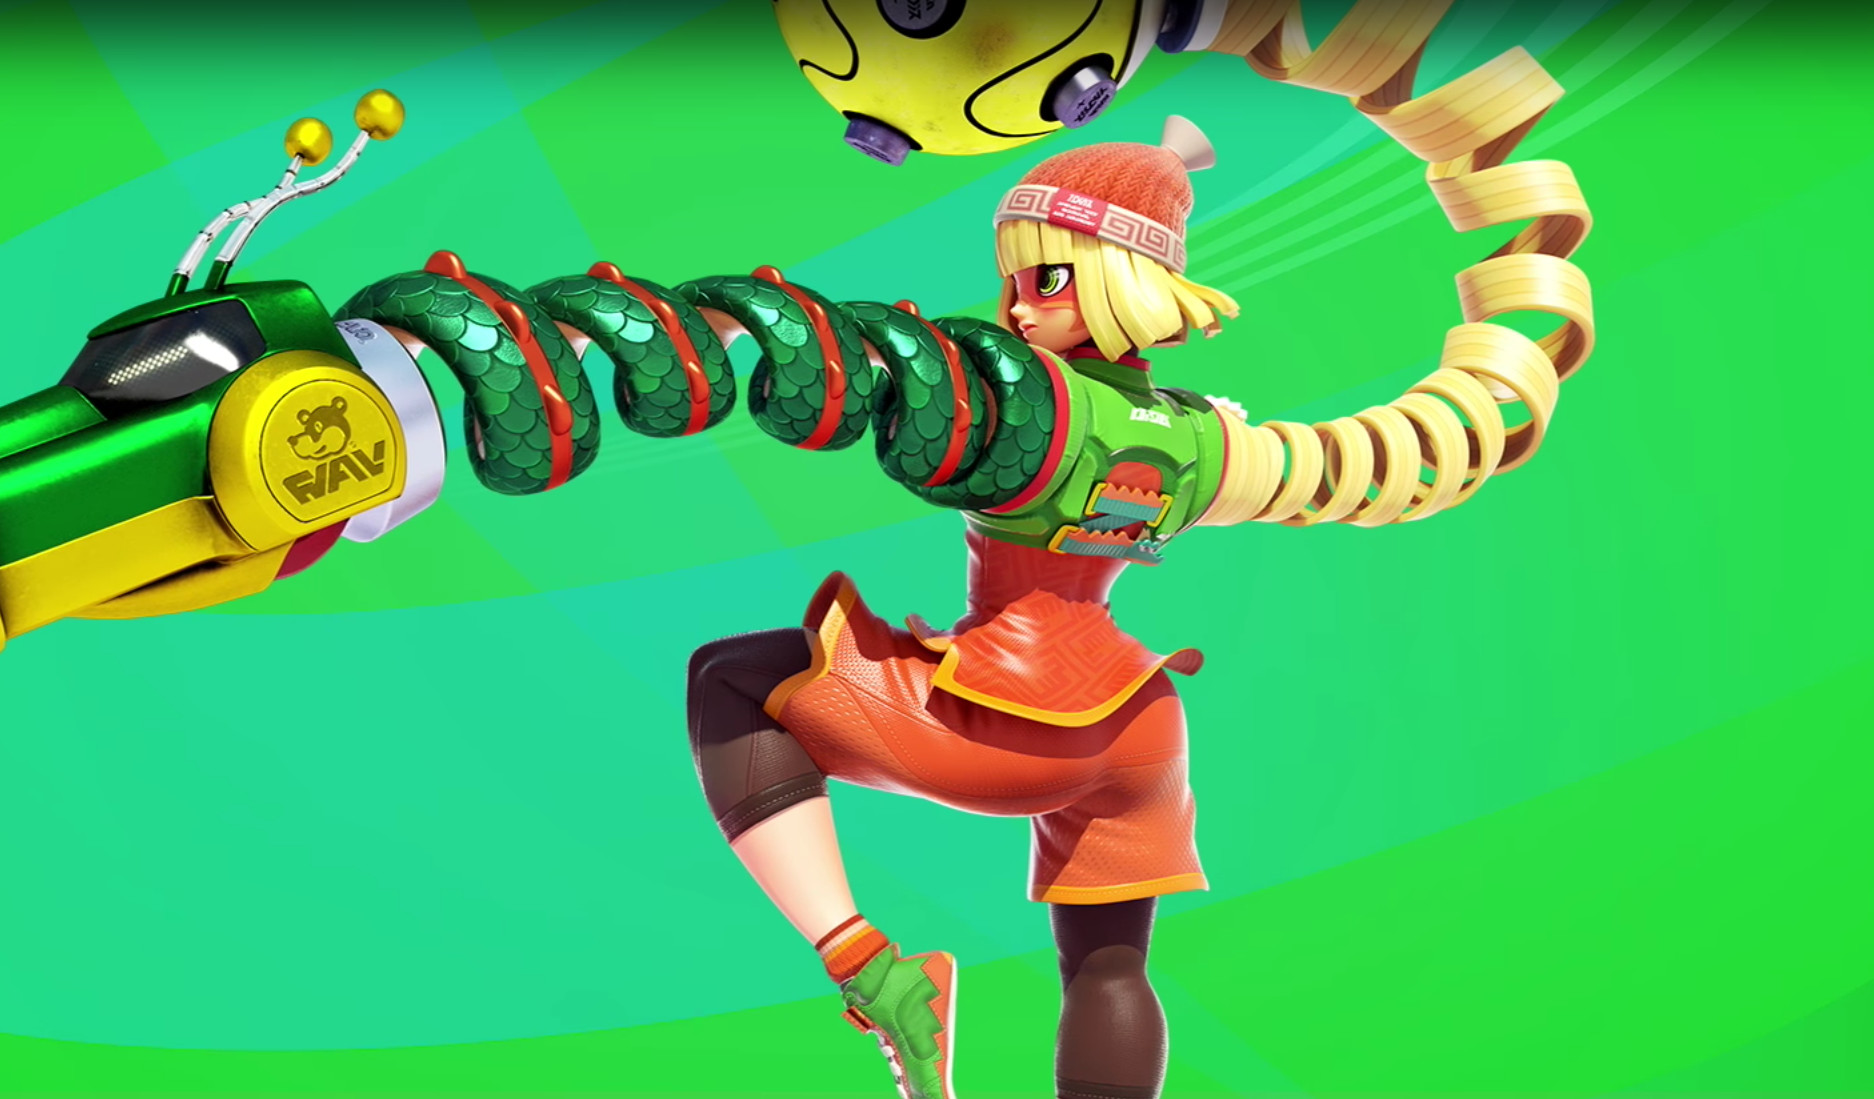 ARMS for Nintendo Switch arrives on June 16 along with a